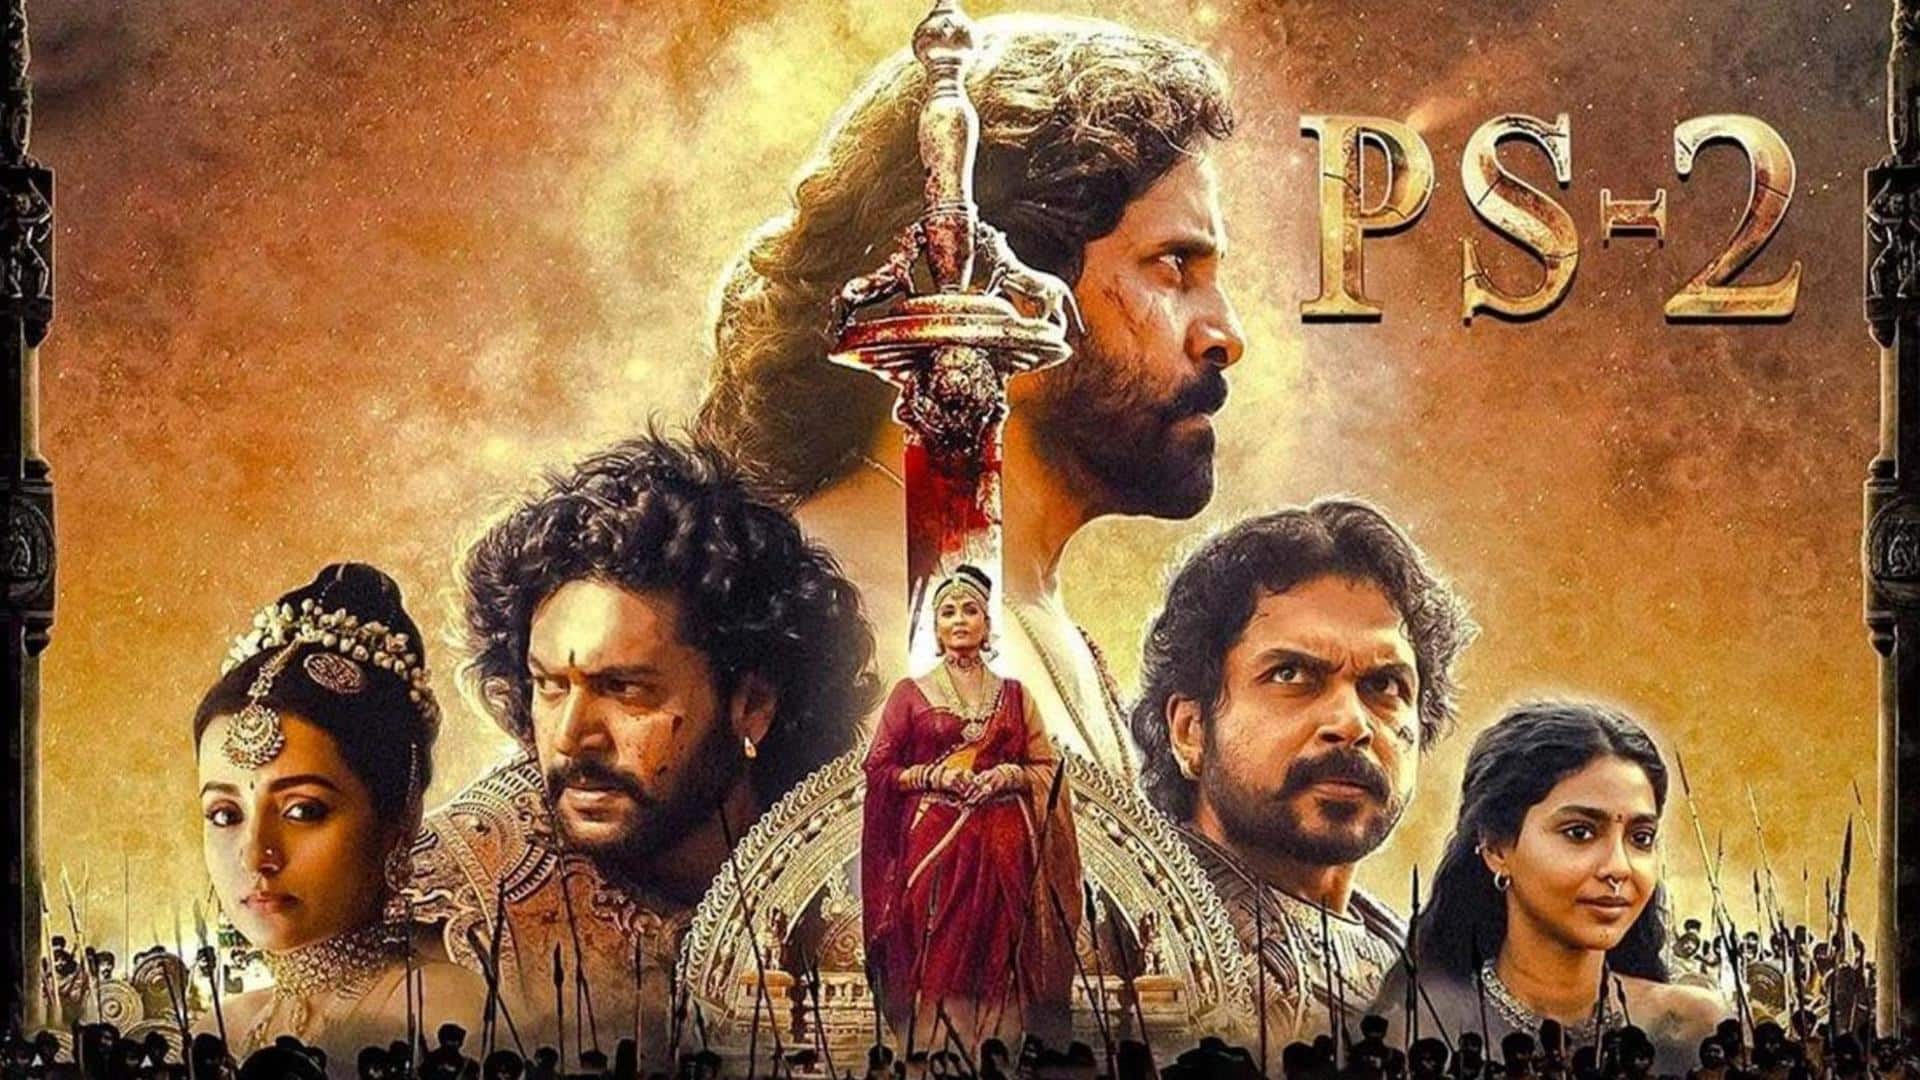 AR Rahman's composition in 'PS: II' faces plagiarism allegations